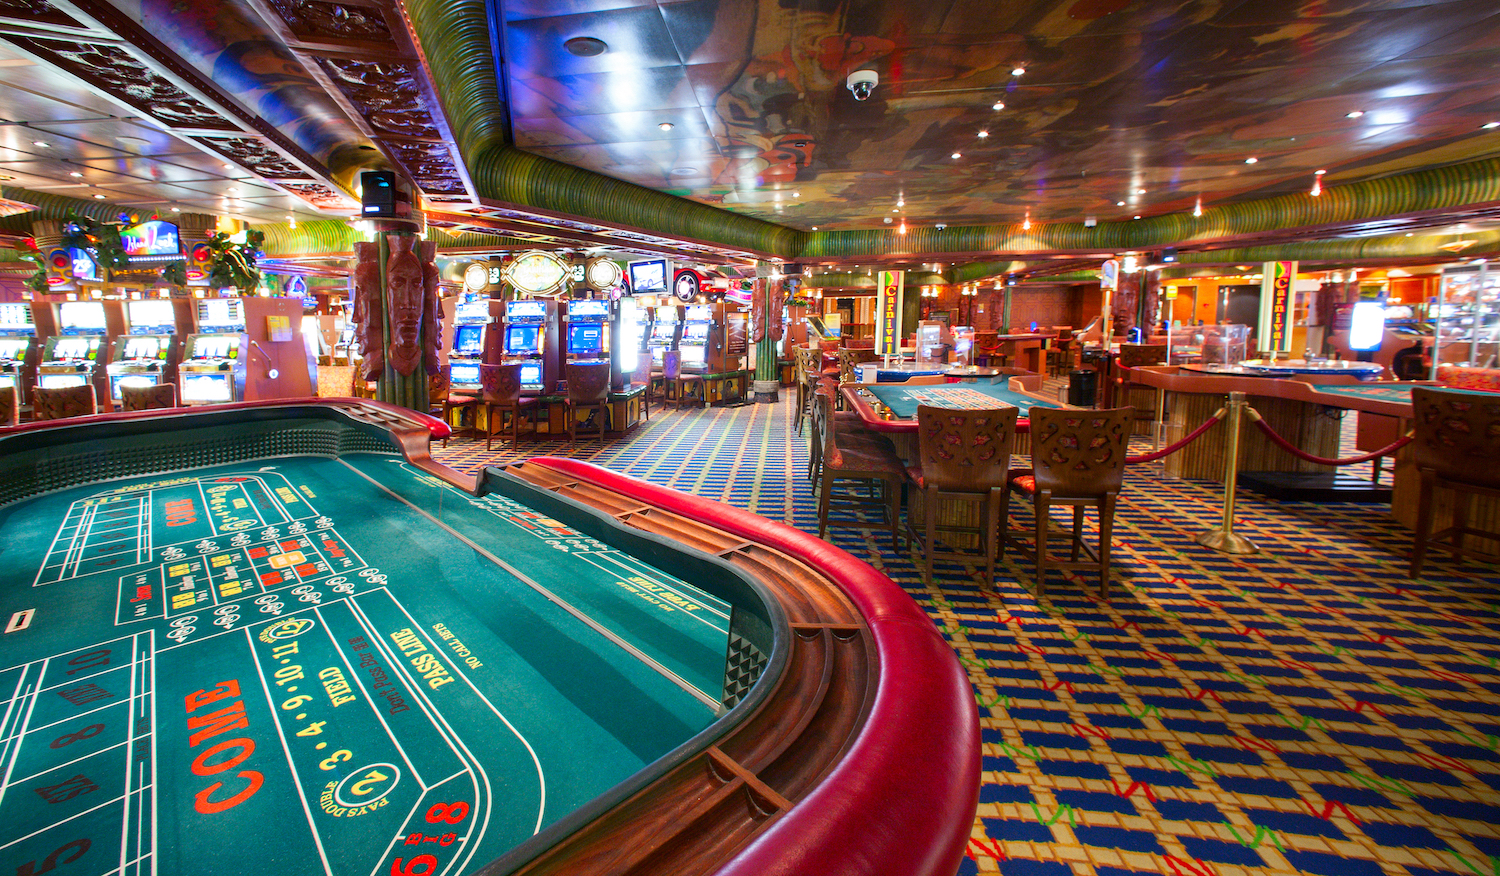 What's The Deal With Cruise Ship Gambling? - Gambling Laws At Sea